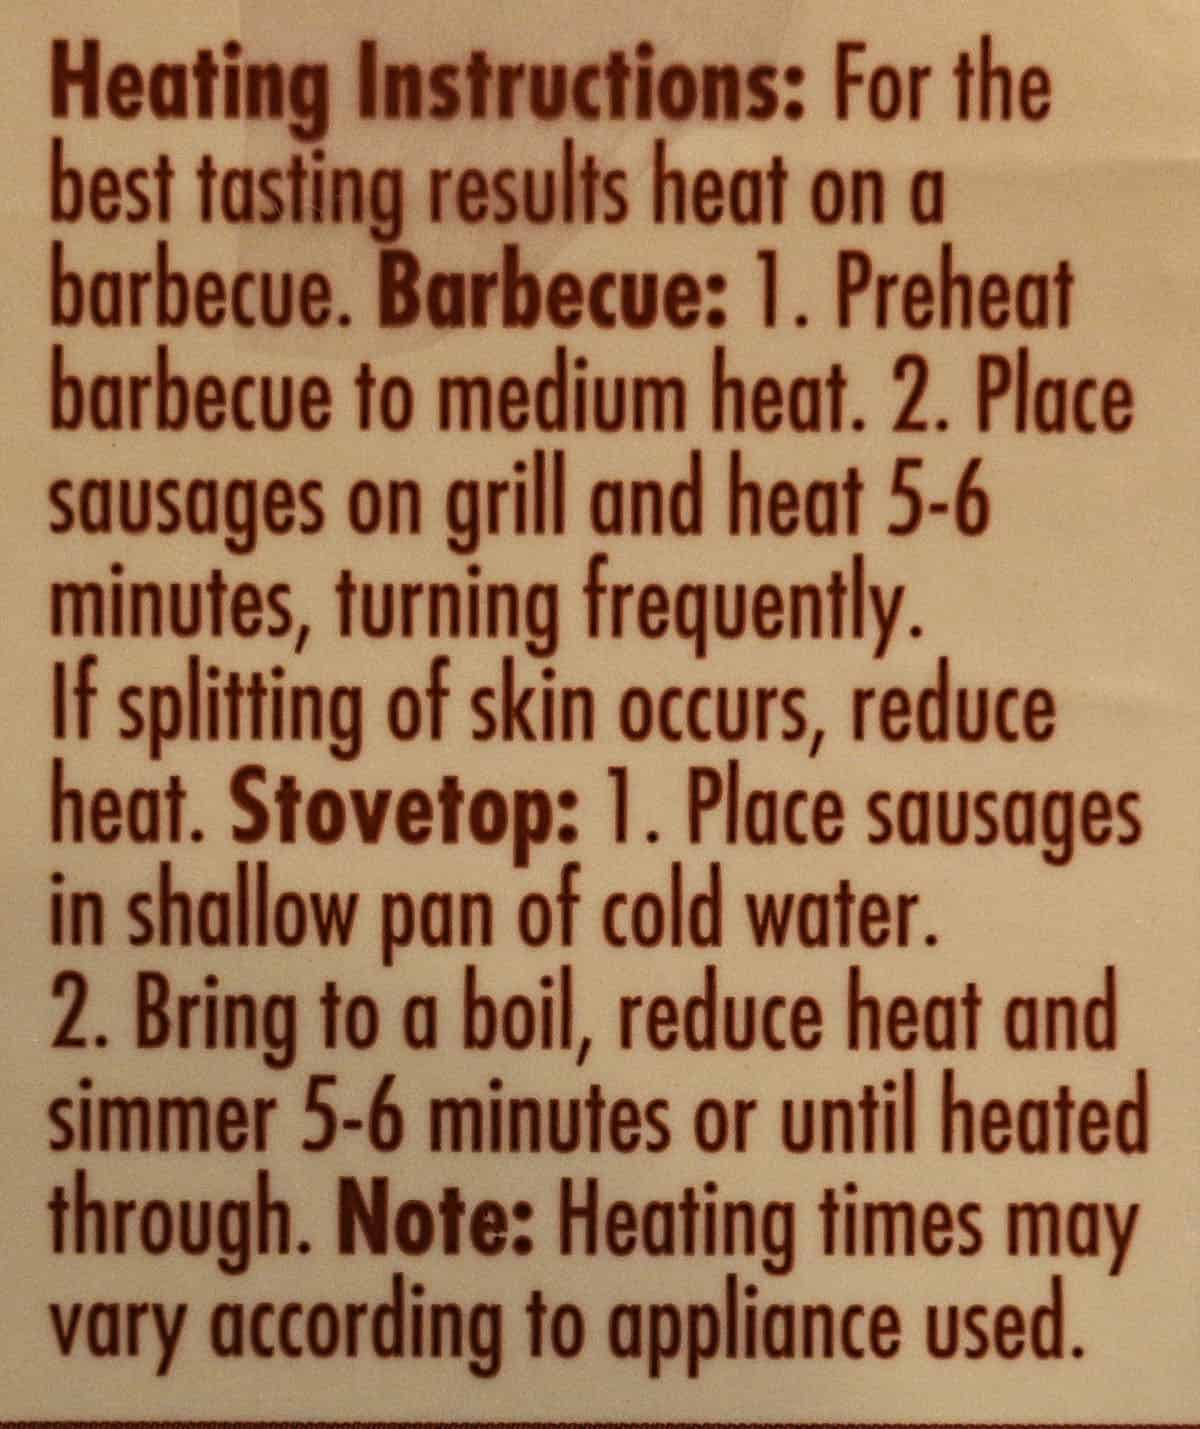 Heating instructions for the sausages from the package.